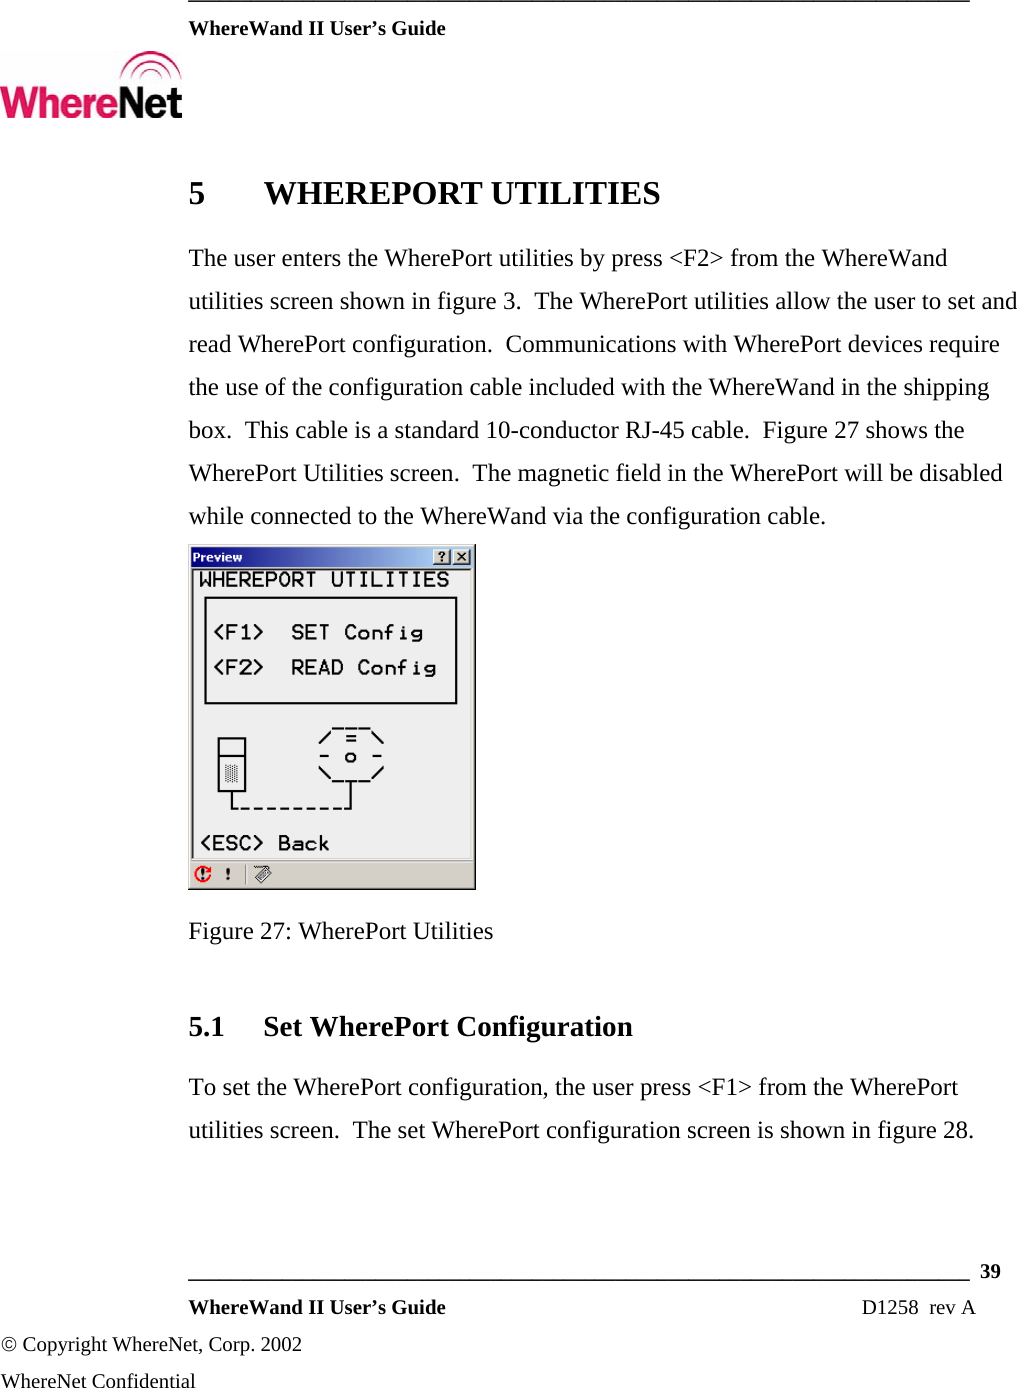  ___________________________________________________________________________  WhereWand II User’s Guide     ___________________________________________________________________________  39  WhereWand II User’s Guide                                                                          D1258  rev A © Copyright WhereNet, Corp. 2002  WhereNet Confidential 5 WHEREPORT UTILITIES The user enters the WherePort utilities by press &lt;F2&gt; from the WhereWand utilities screen shown in figure 3.  The WherePort utilities allow the user to set and read WherePort configuration.  Communications with WherePort devices require the use of the configuration cable included with the WhereWand in the shipping box.  This cable is a standard 10-conductor RJ-45 cable.  Figure 27 shows the WherePort Utilities screen.  The magnetic field in the WherePort will be disabled while connected to the WhereWand via the configuration cable.  Figure 27: WherePort Utilities 5.1 Set WherePort Configuration To set the WherePort configuration, the user press &lt;F1&gt; from the WherePort utilities screen.  The set WherePort configuration screen is shown in figure 28. 